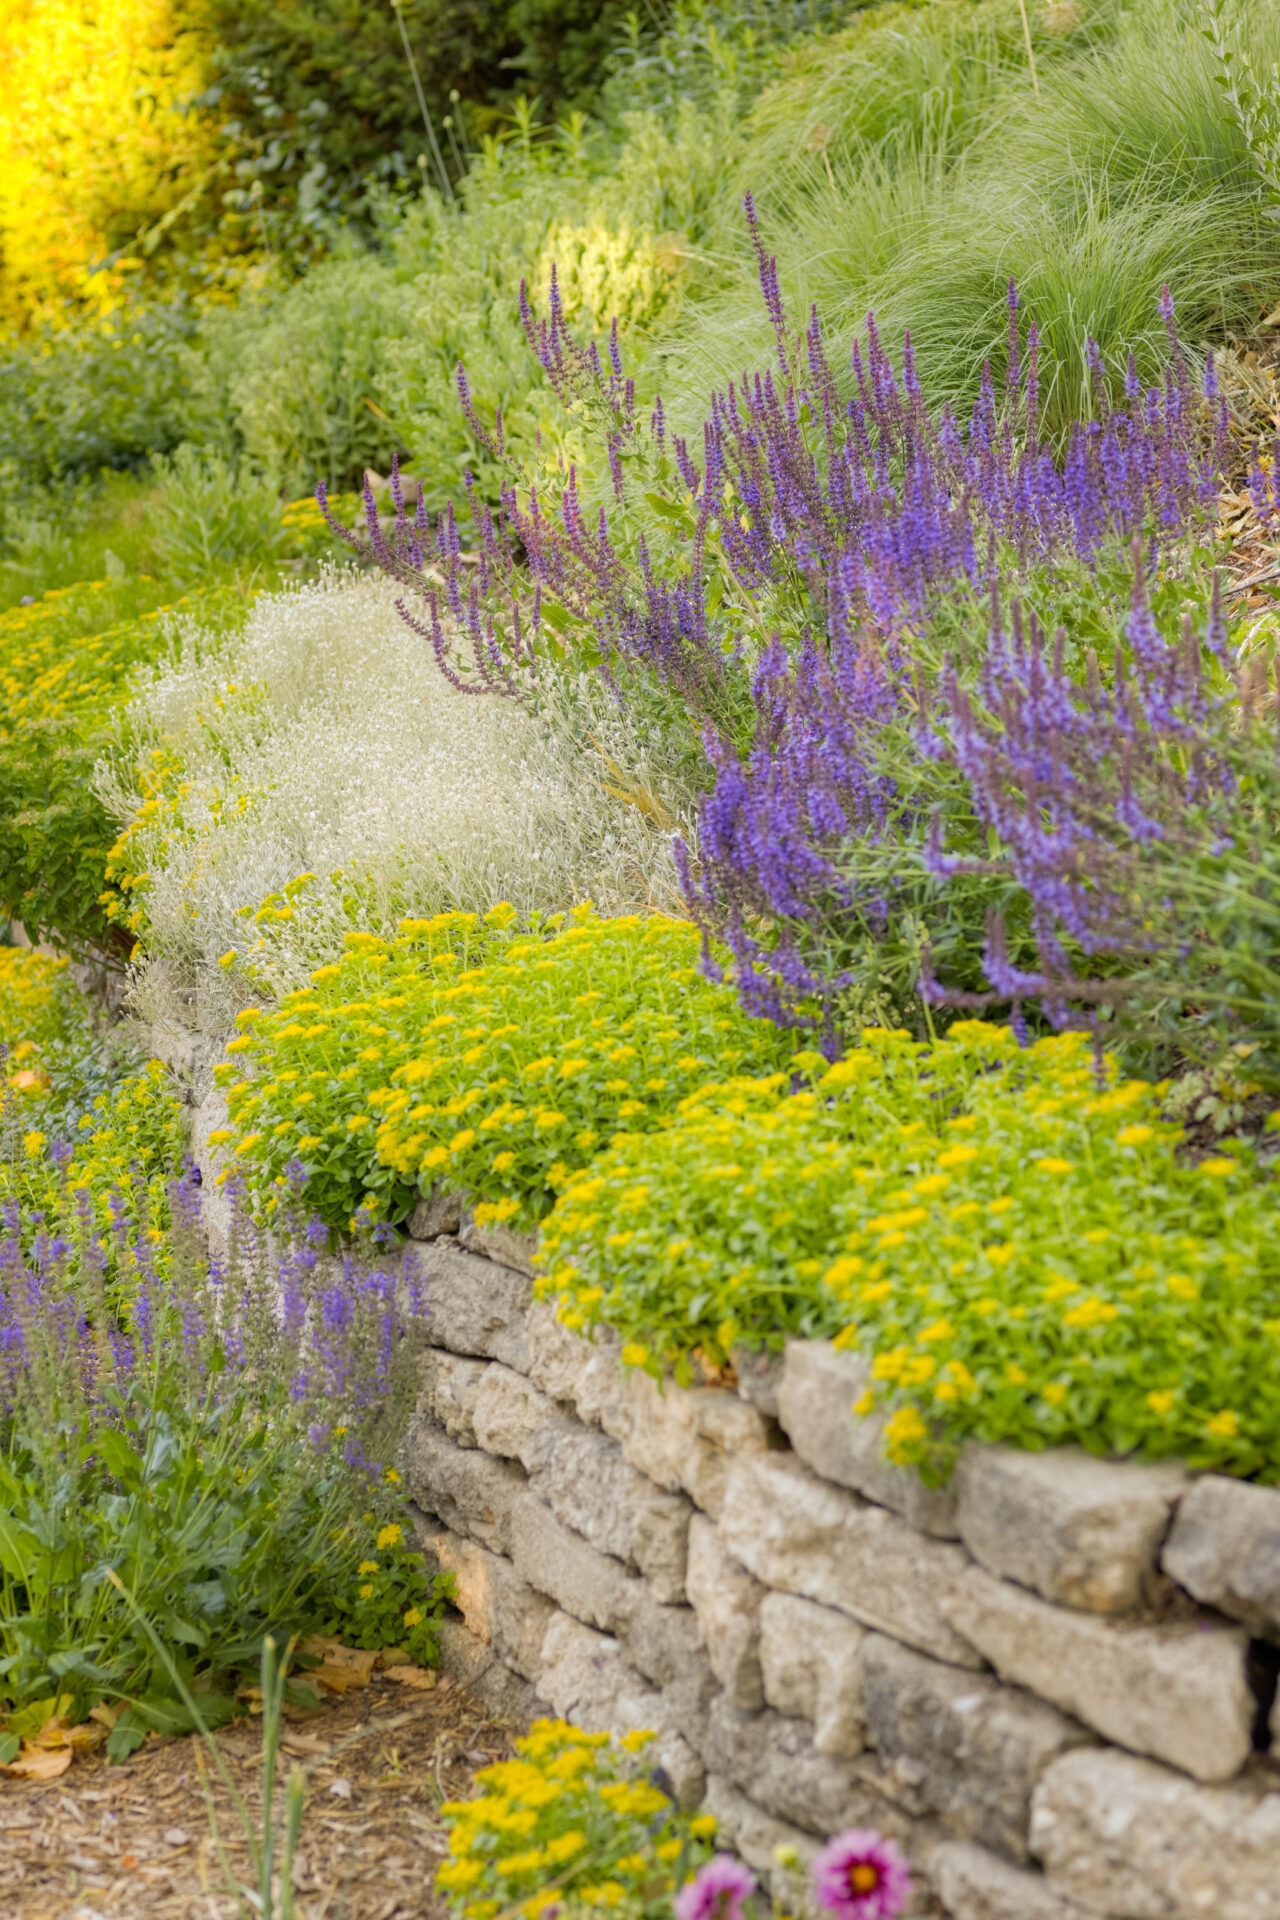 This image features a vibrant garden with a stone retaining wall, purple flowers, lush greenery, and patches of yellow blooms on a sunny day.